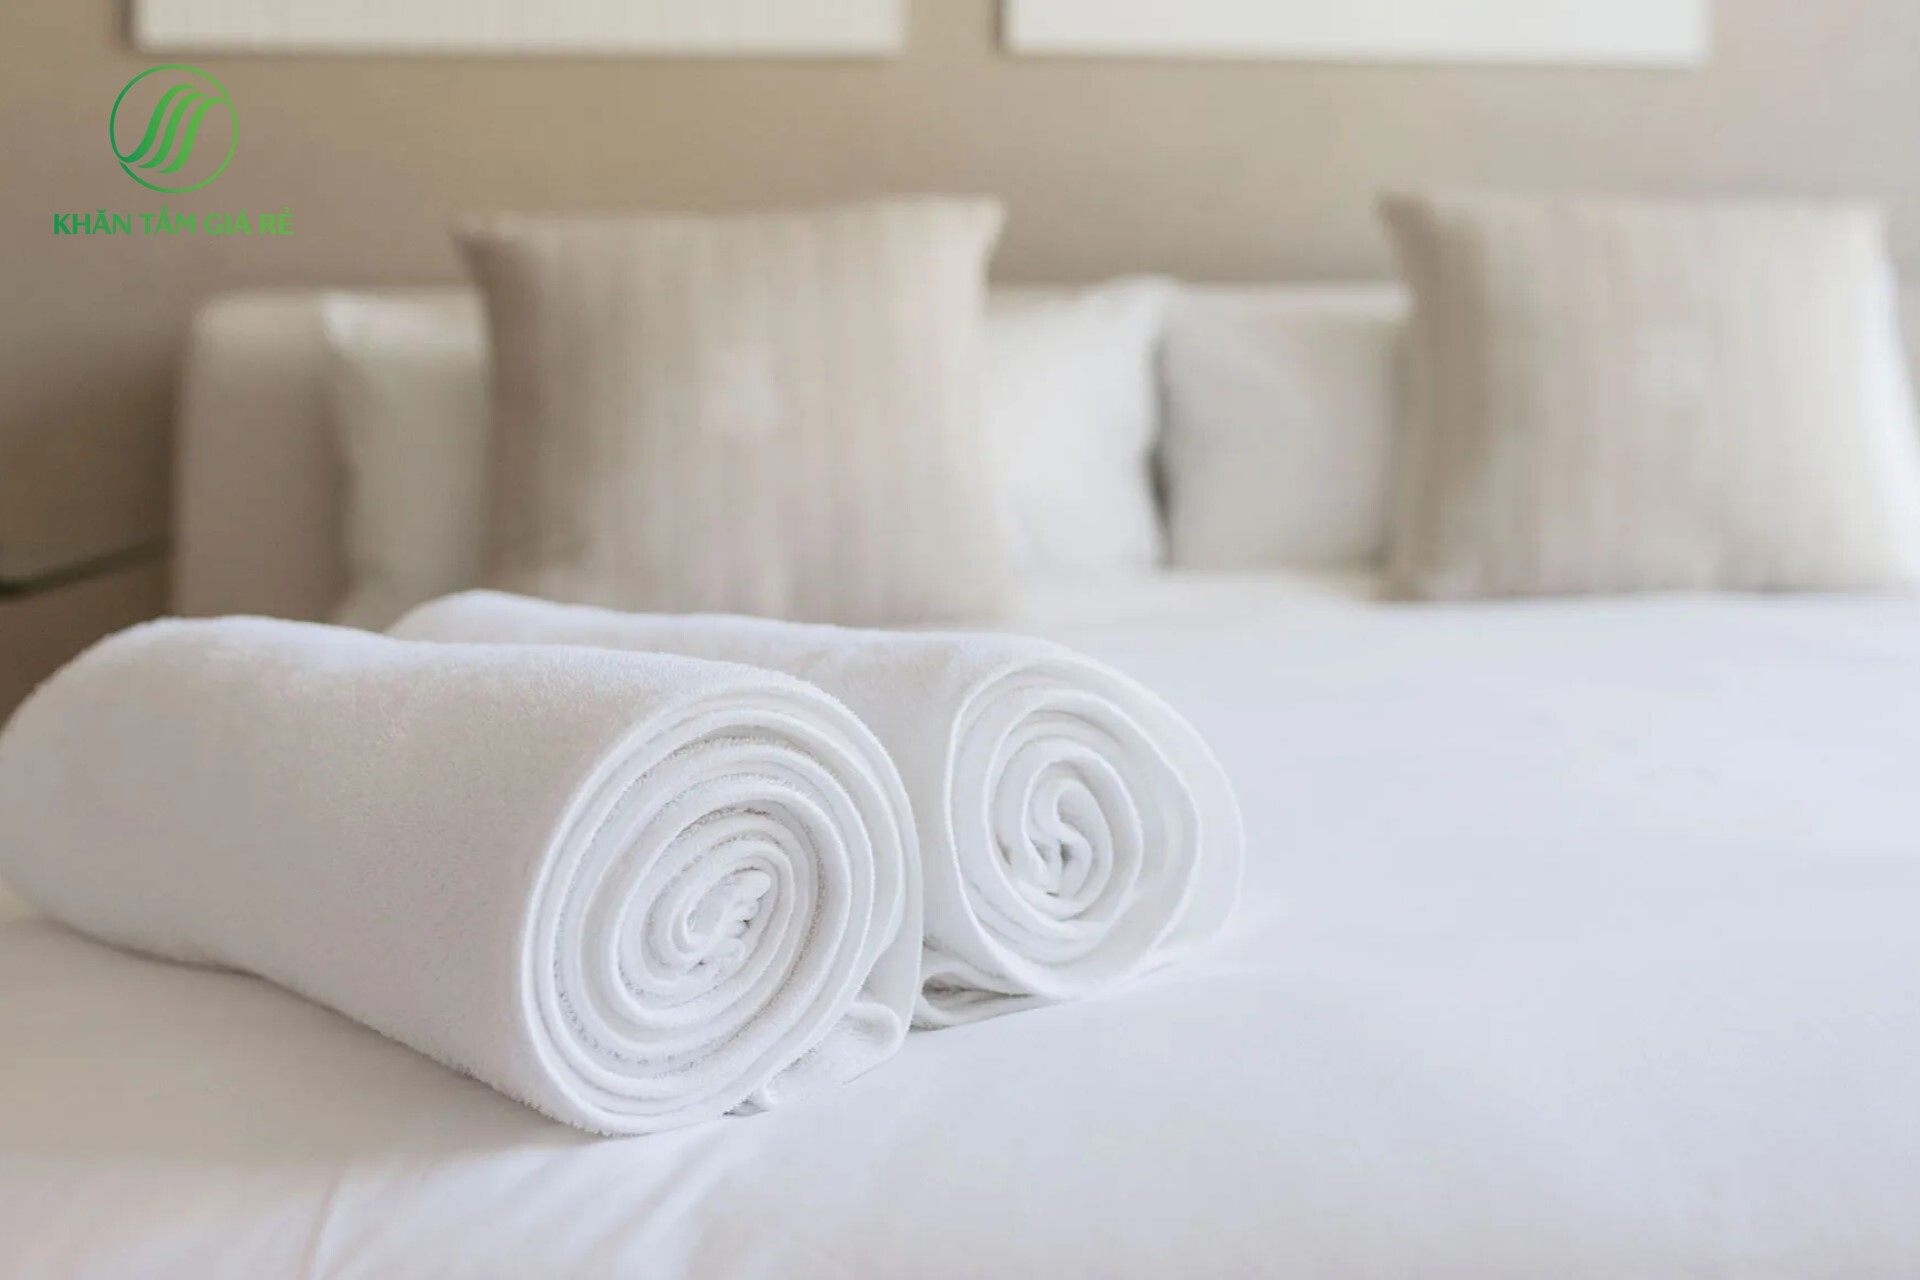 A towel the quality will be shown to be the professional level, thoughtful of the hotel to customers